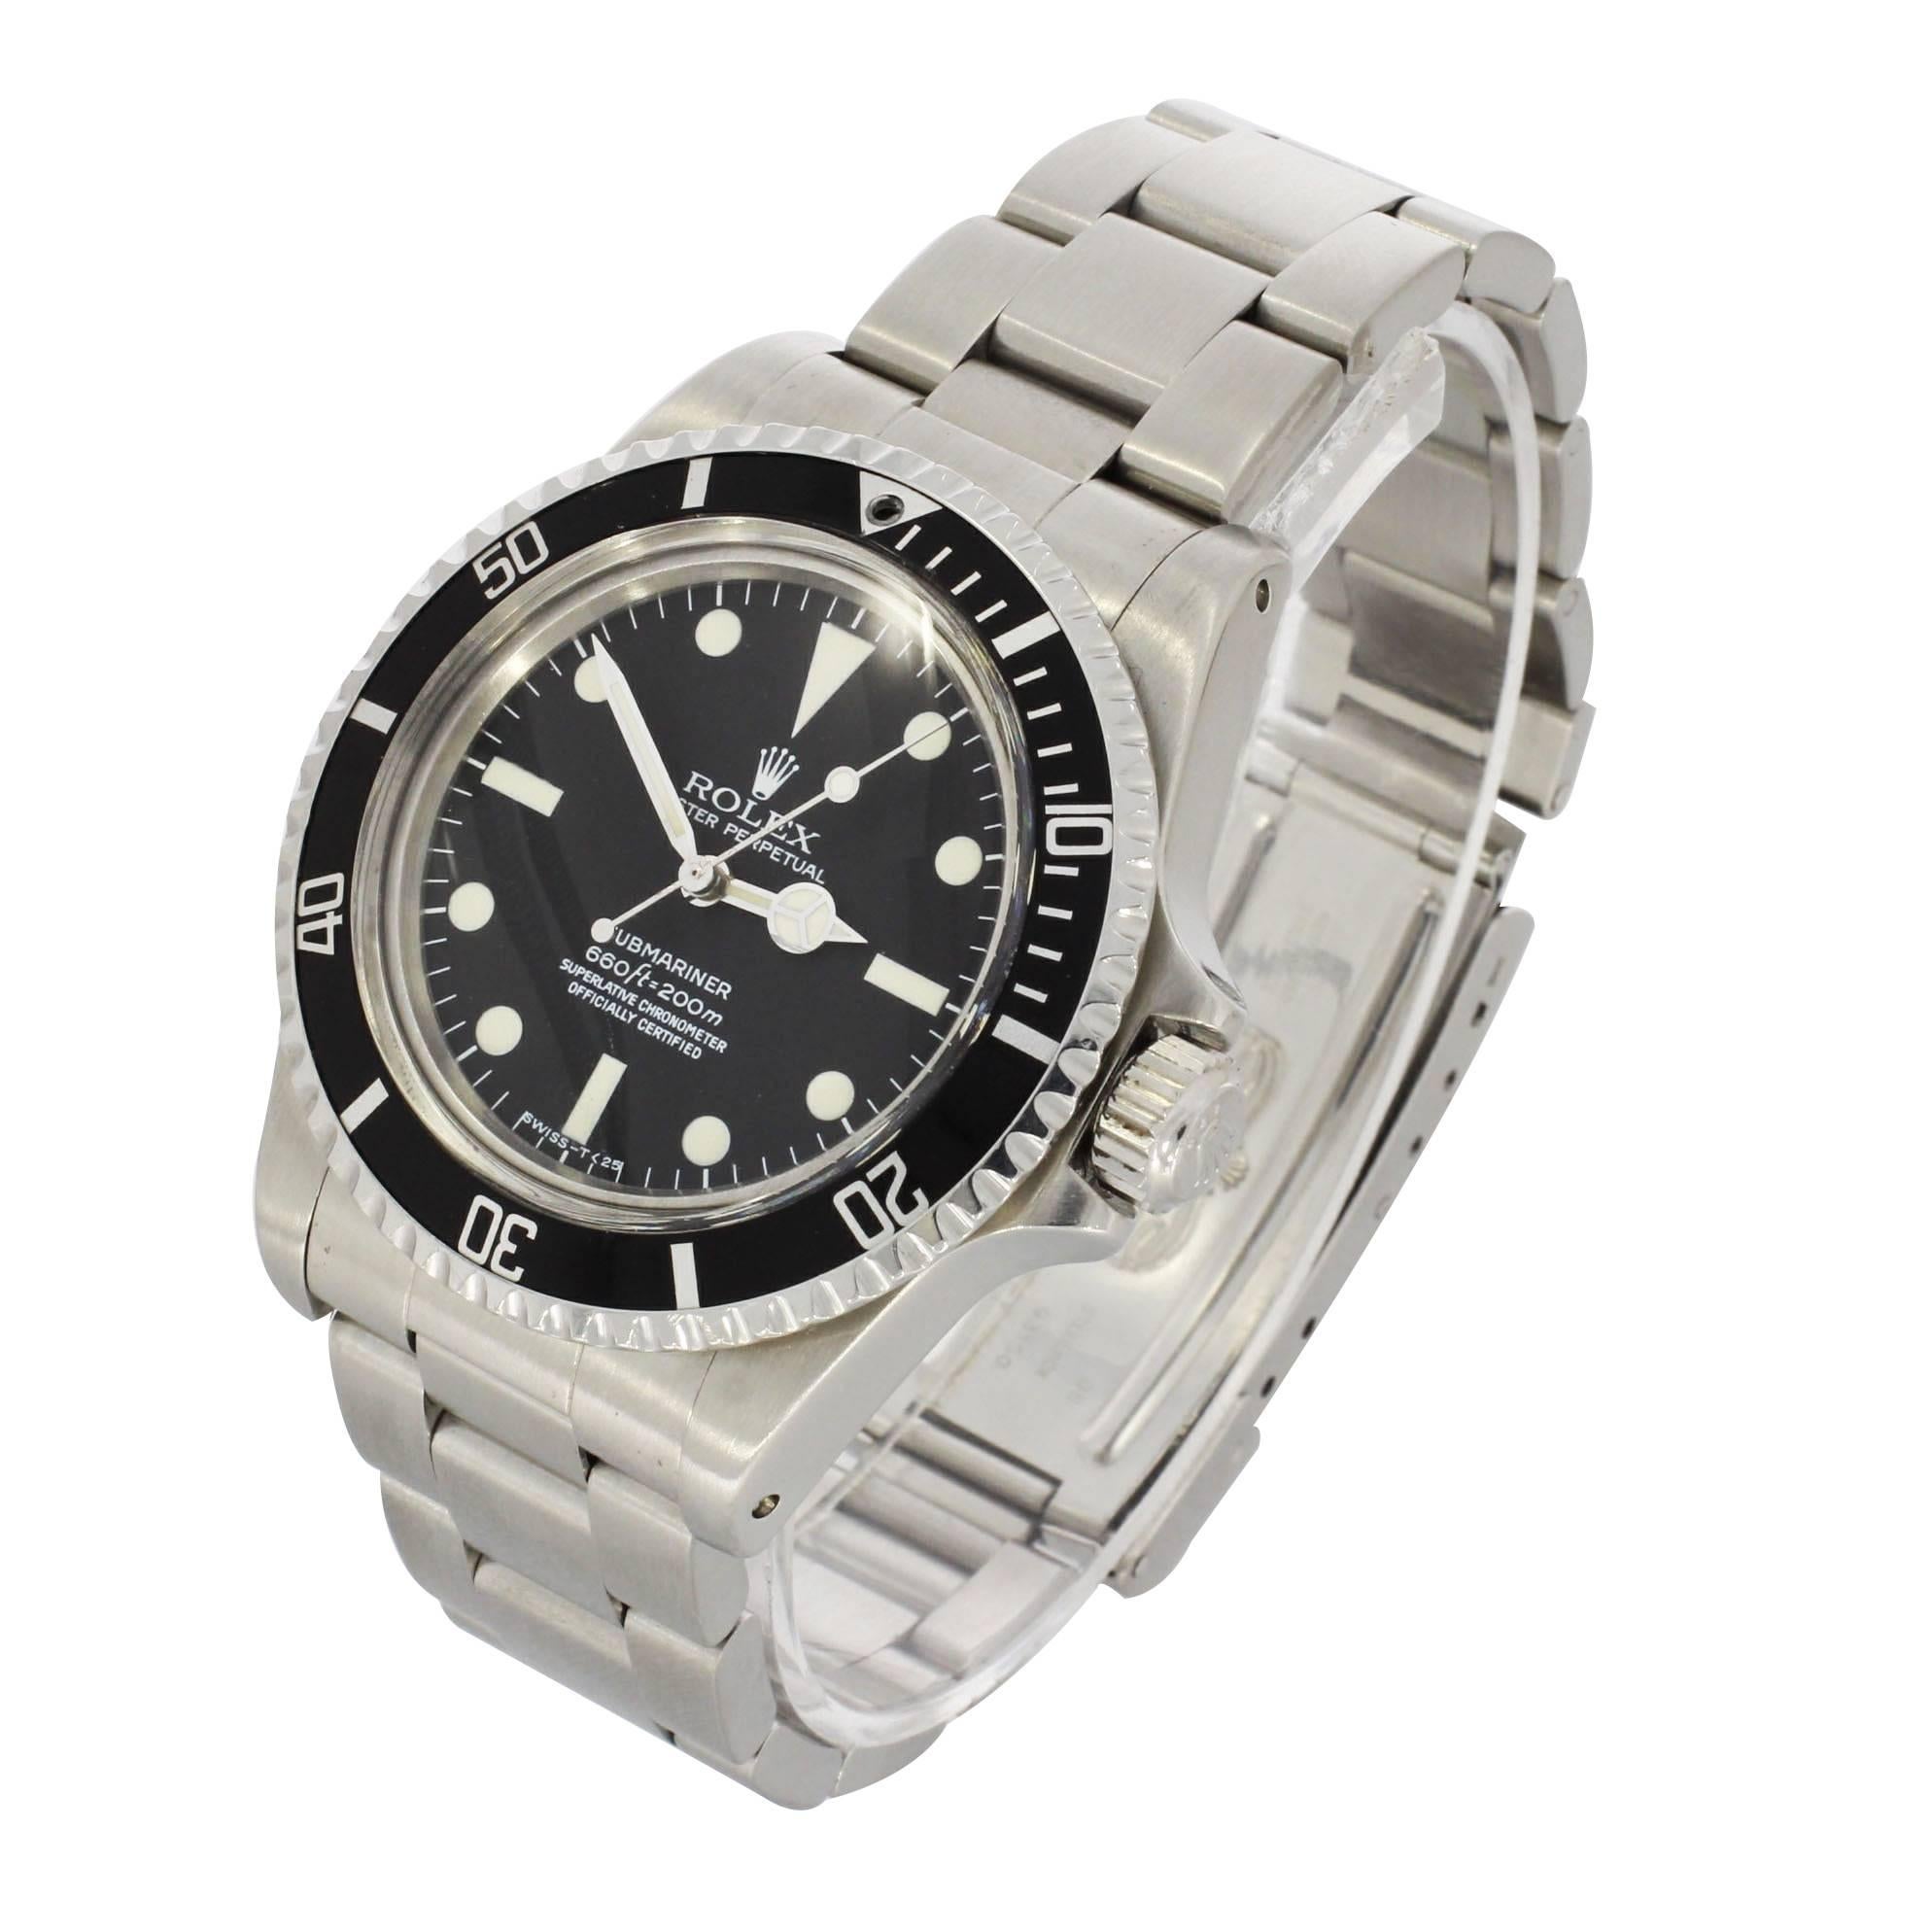 This Rolex has undergone a thorough inspection and service to ensure all aspects of the watch are as they should be to meet our high standards for sale. It has also been referenced against records and registers to help determine a clean history and